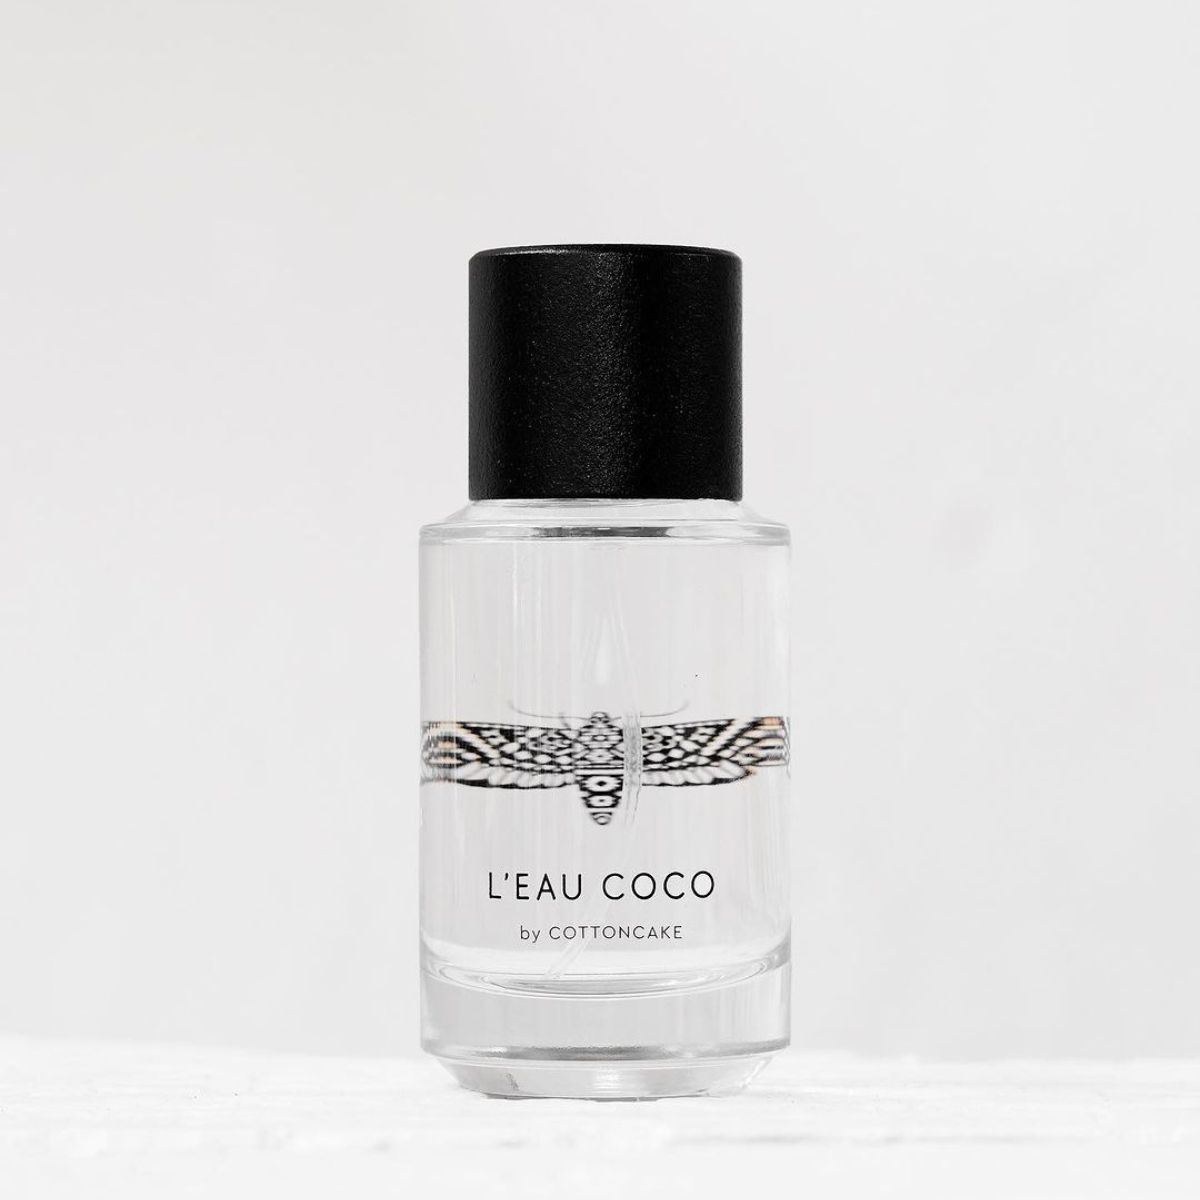 Image of L'eau Coco by the perfume brand Cottoncake